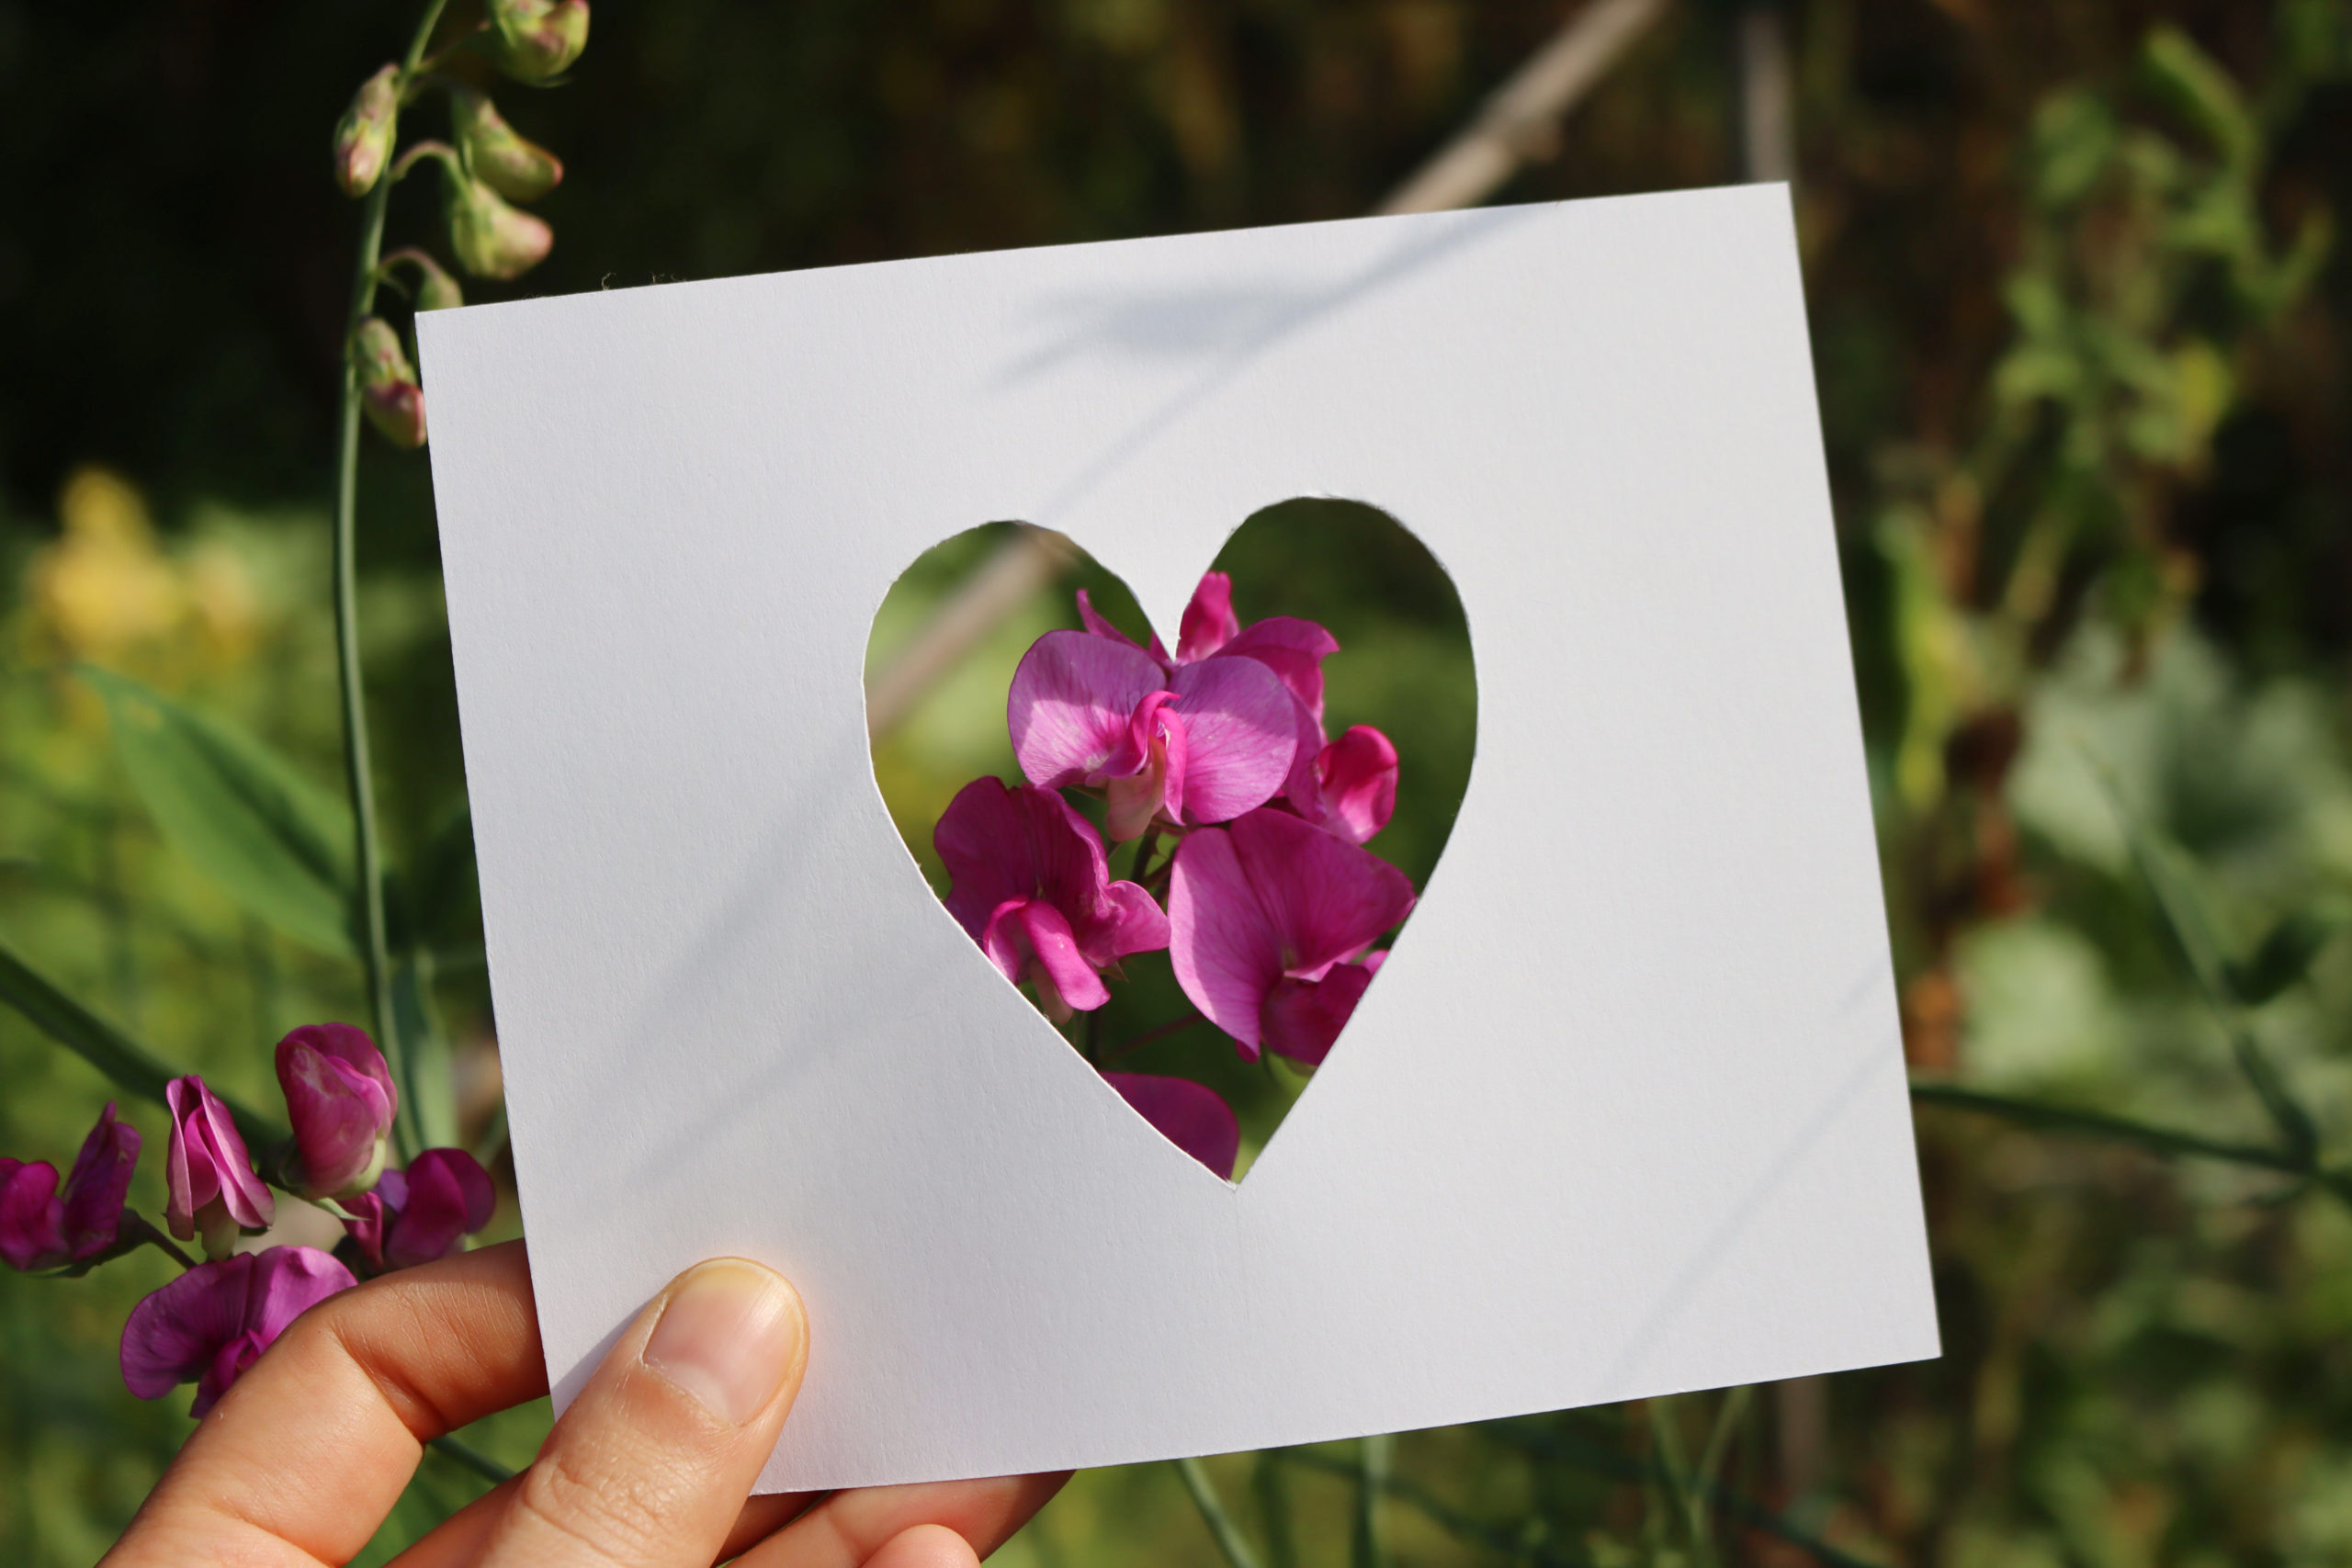 Sweet Pea held in a White Card Cut Out of a Heart